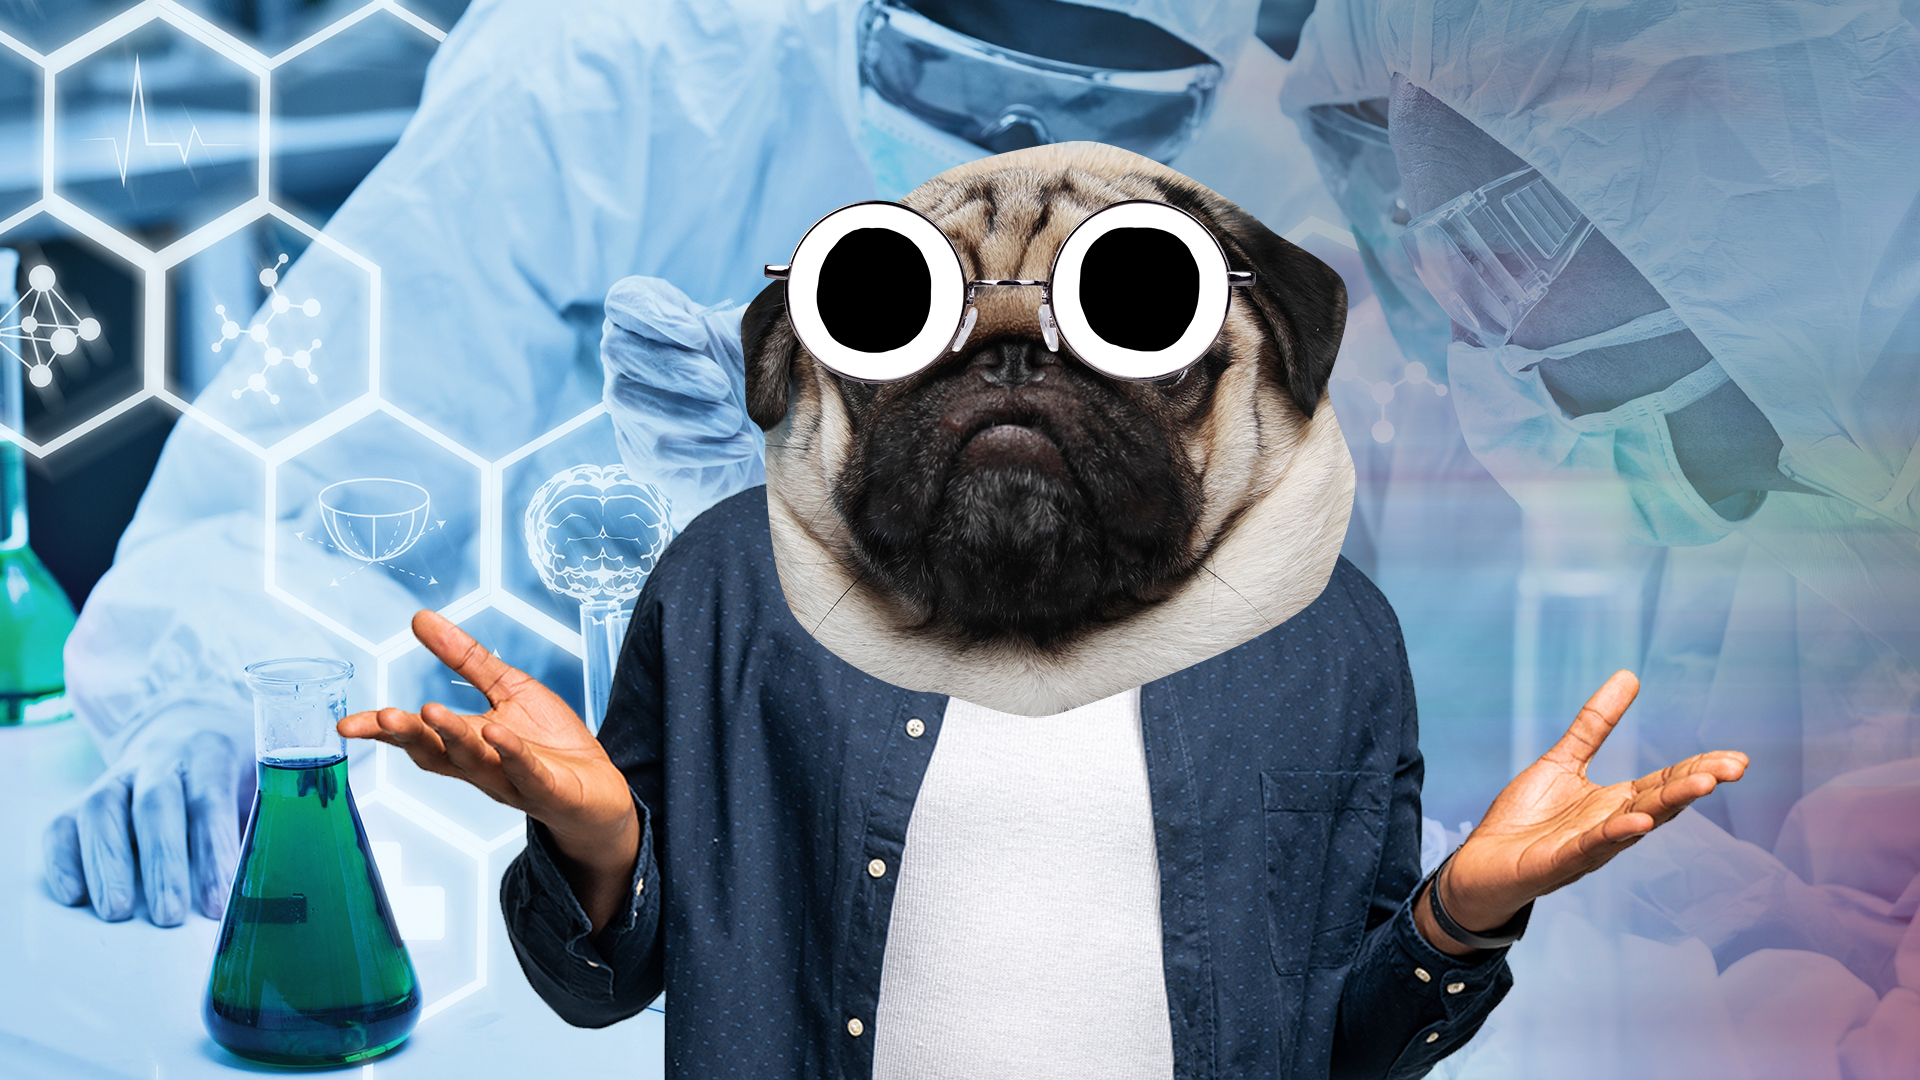 A pug in glasses shrugging against a science lab background